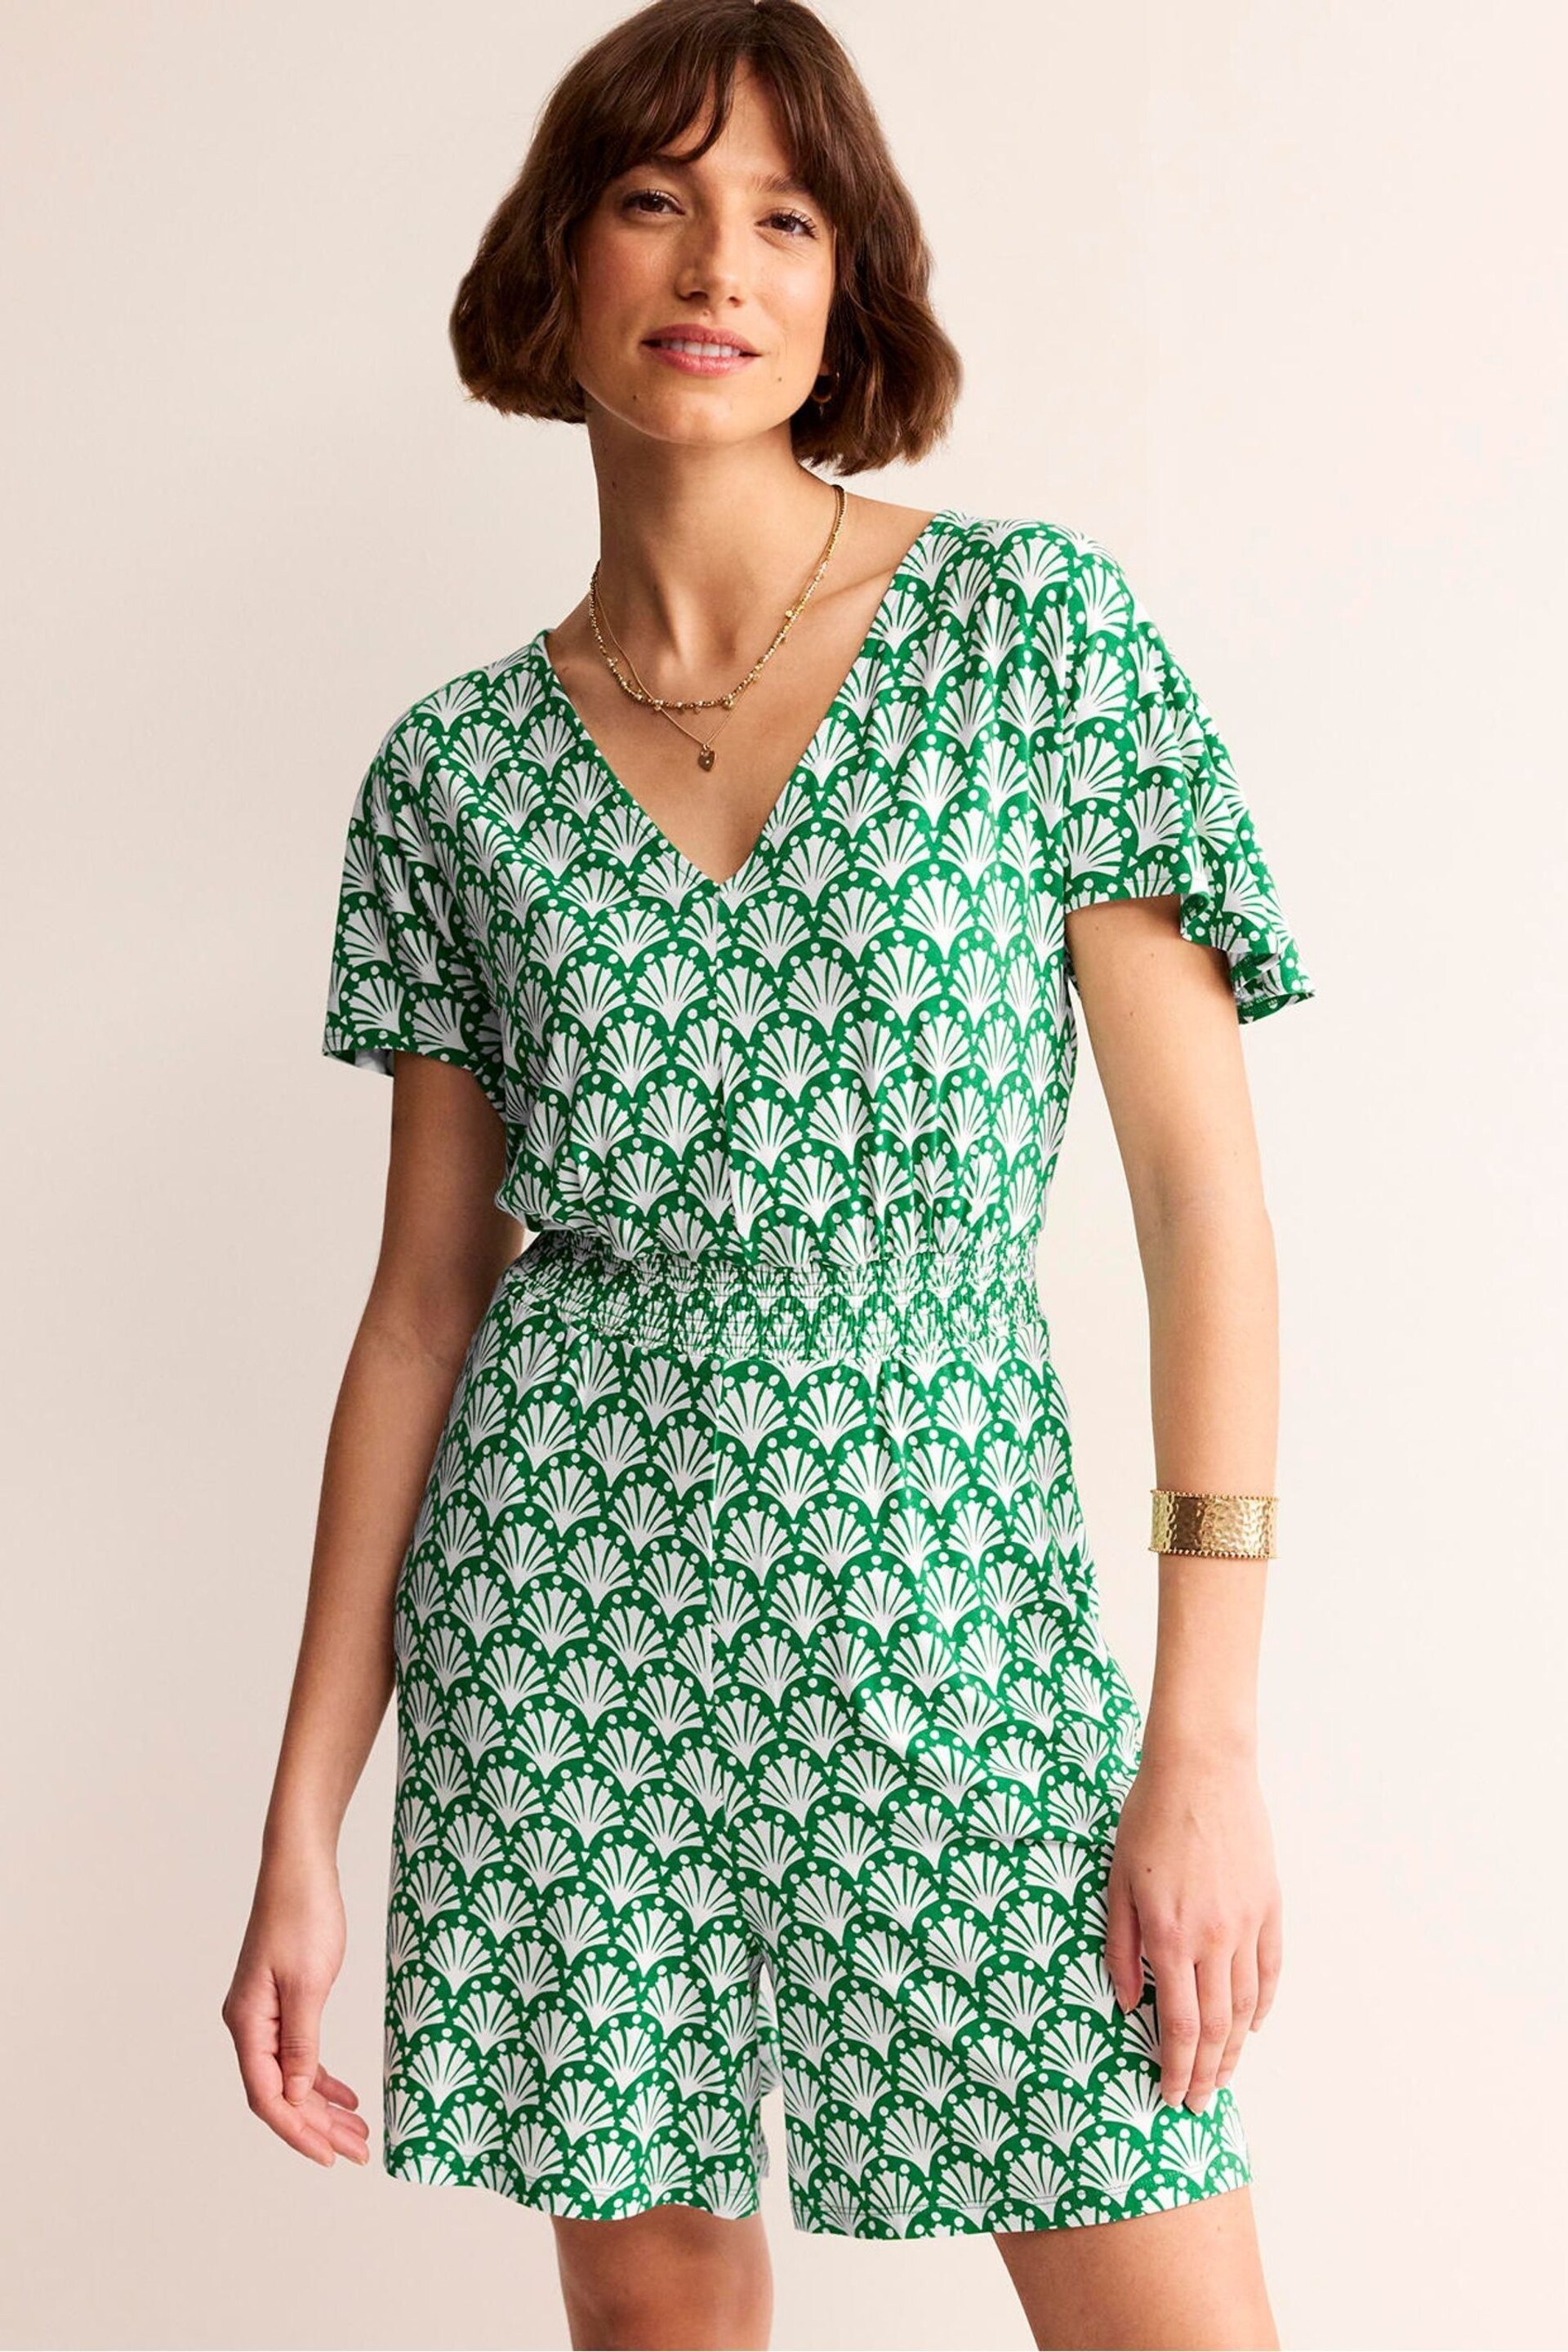 Boden Green Smocked Jersey Playsuit - Image 4 of 5